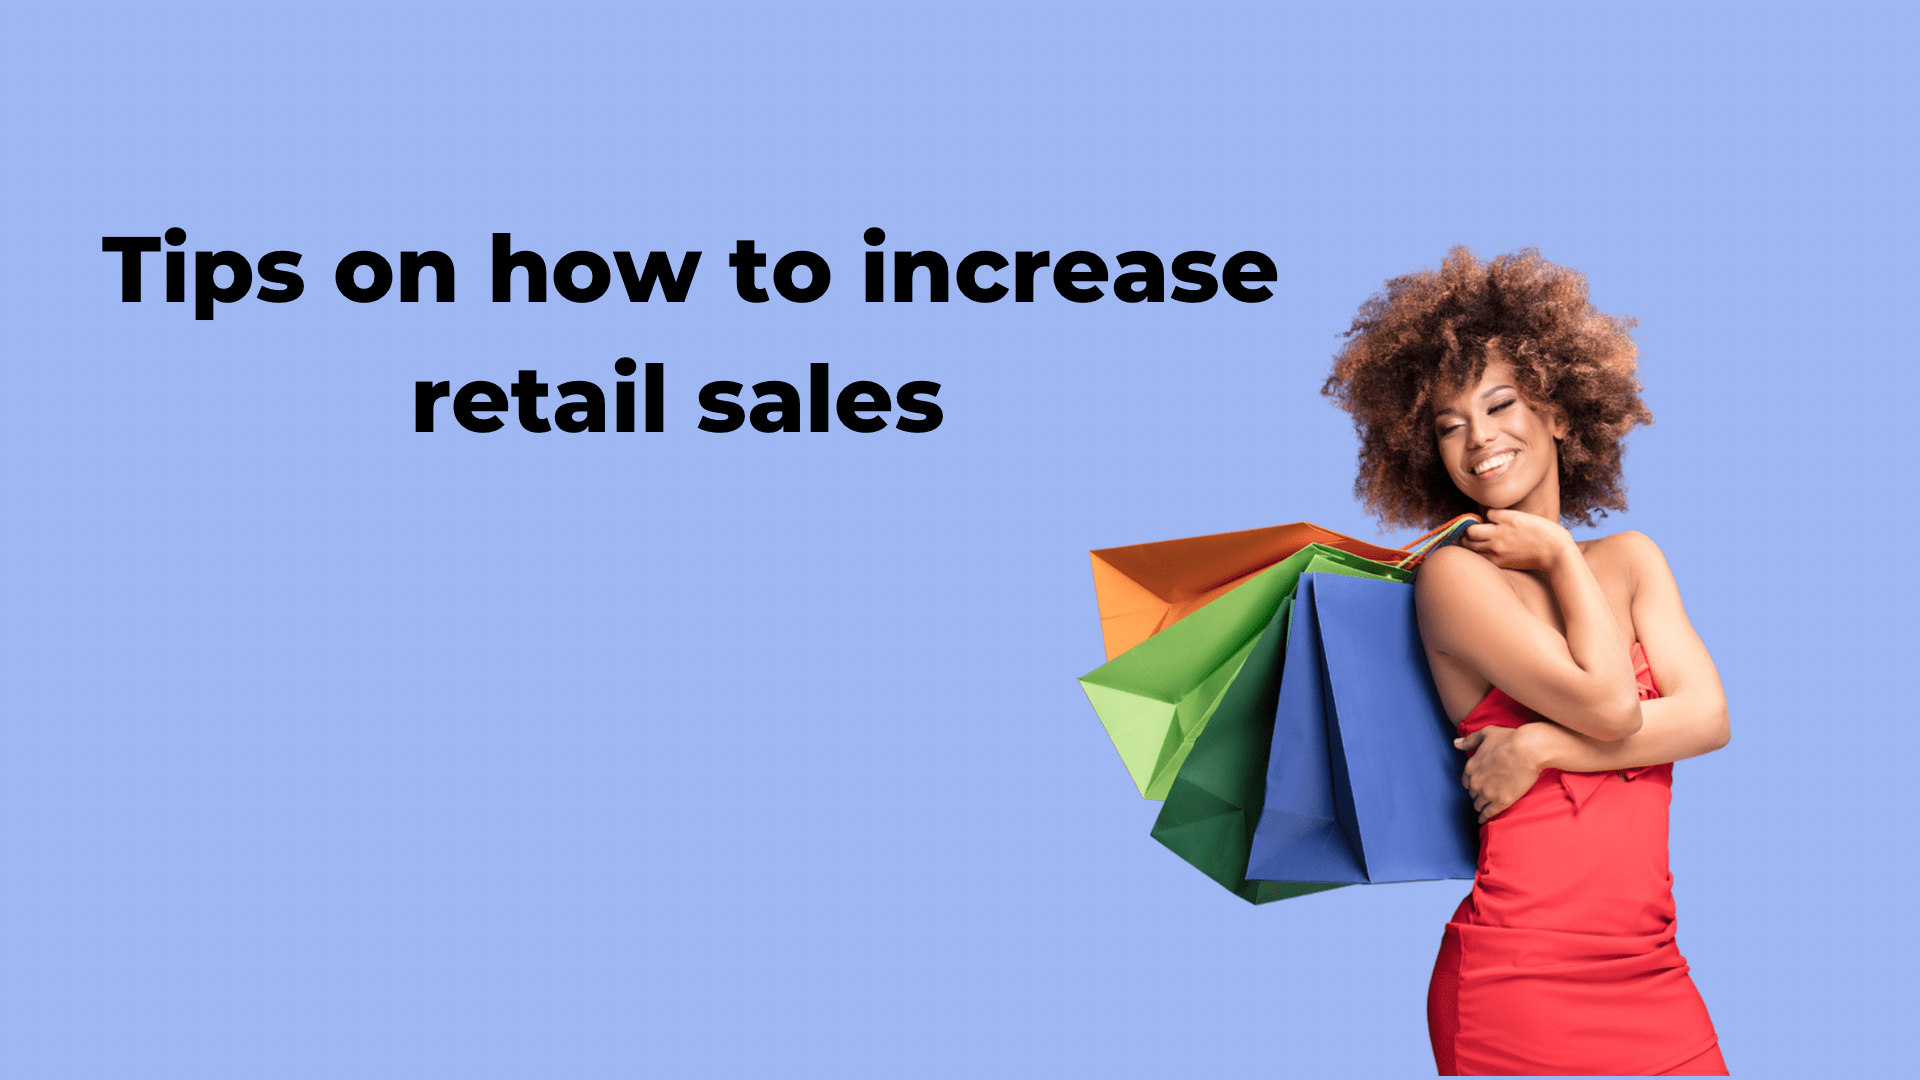 How to increase sales in retail: 6 top tips